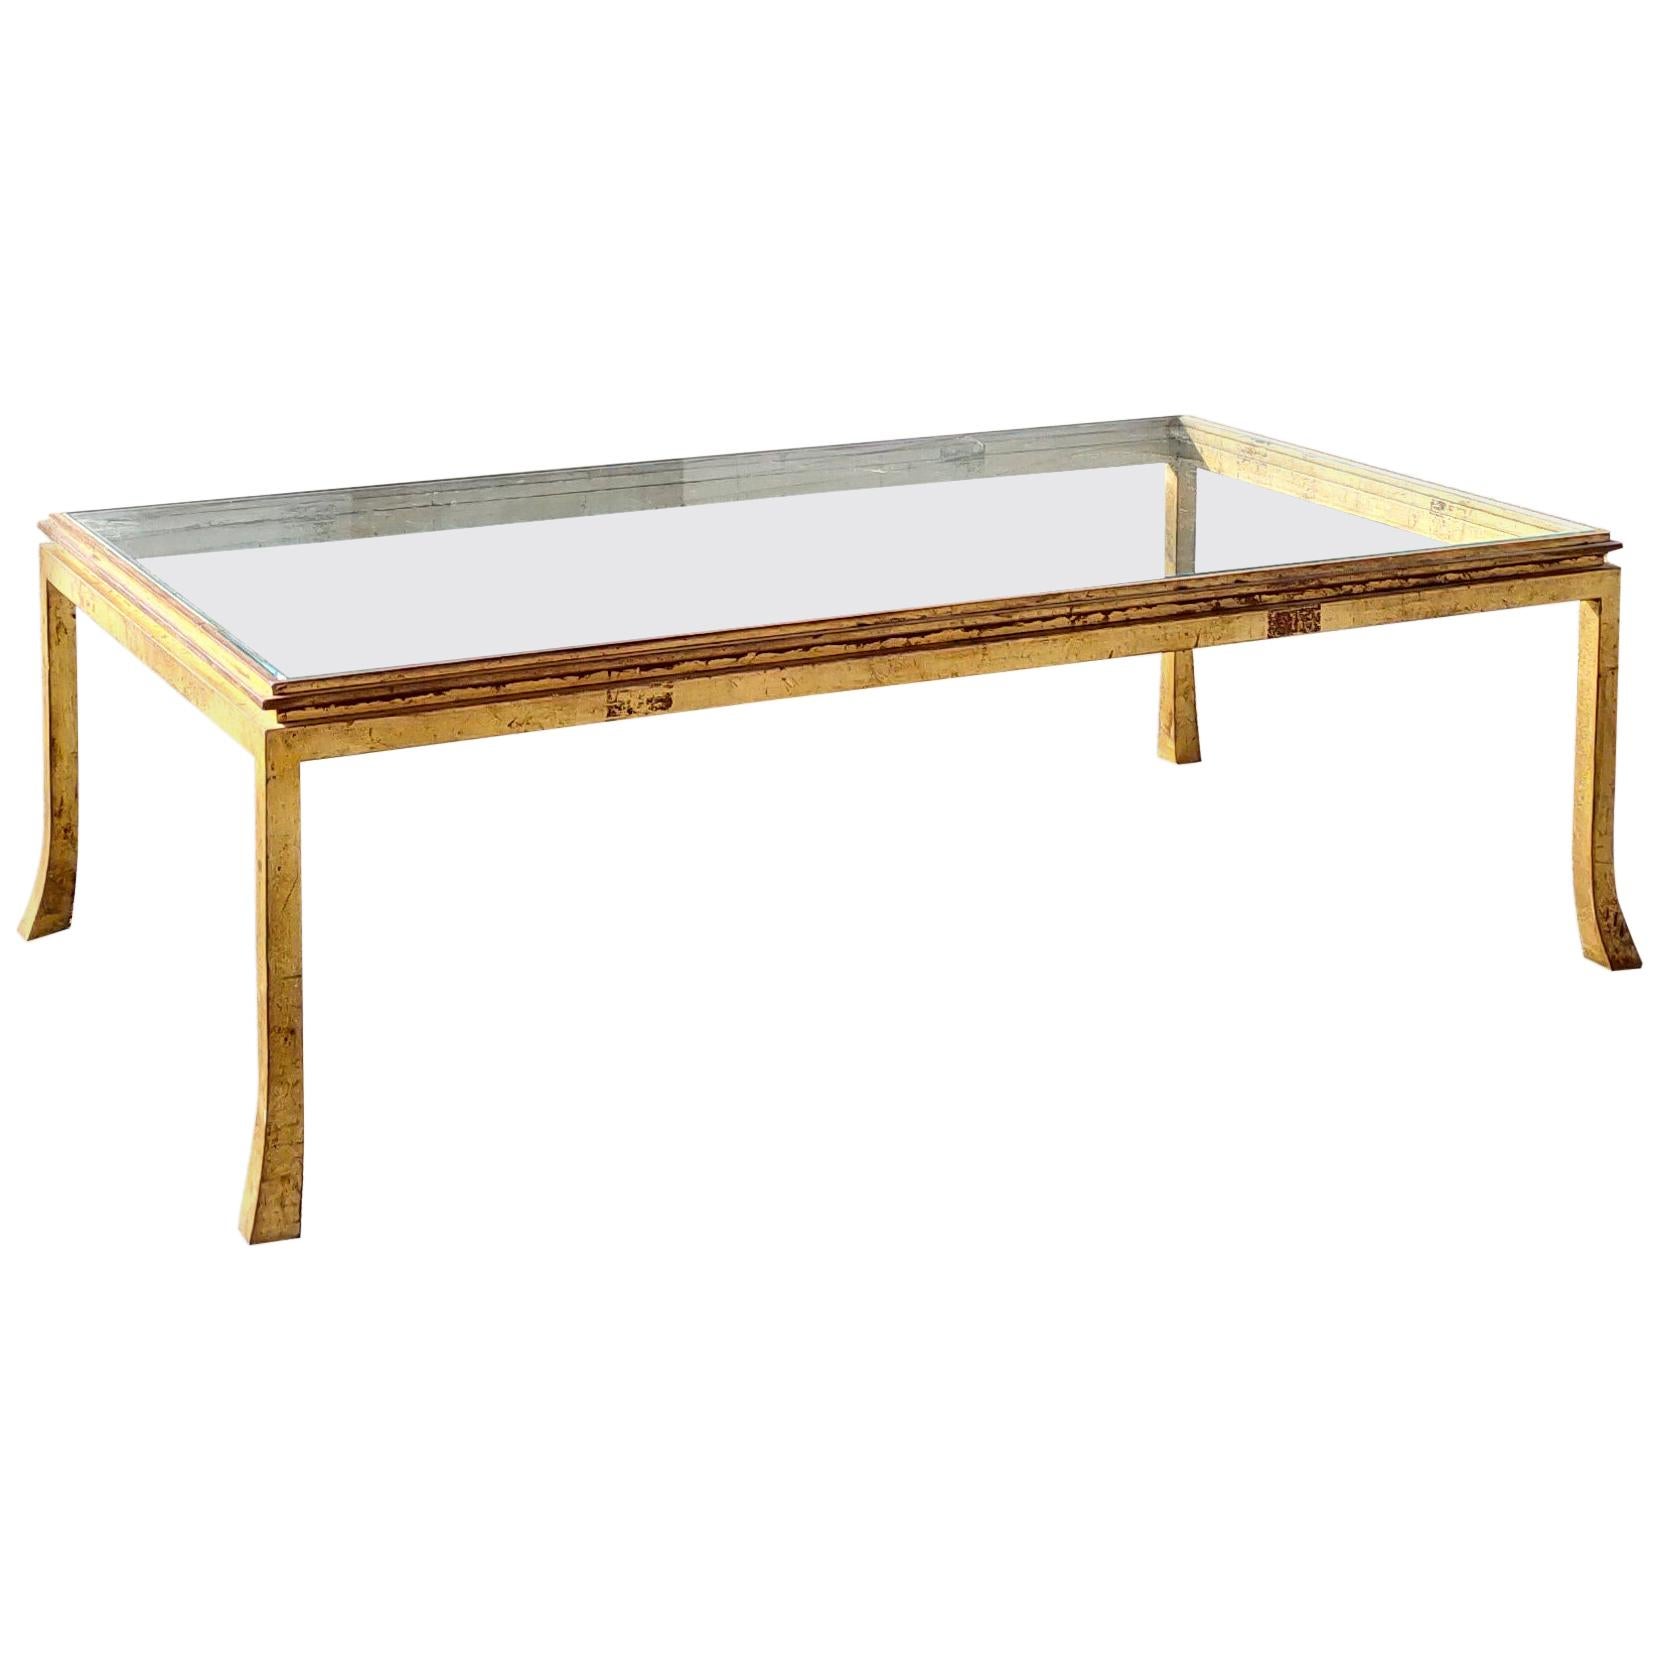 "Courbes" Gold Leaf Coffee Table by Henri Pouenat for Ramsay, France, 1960s